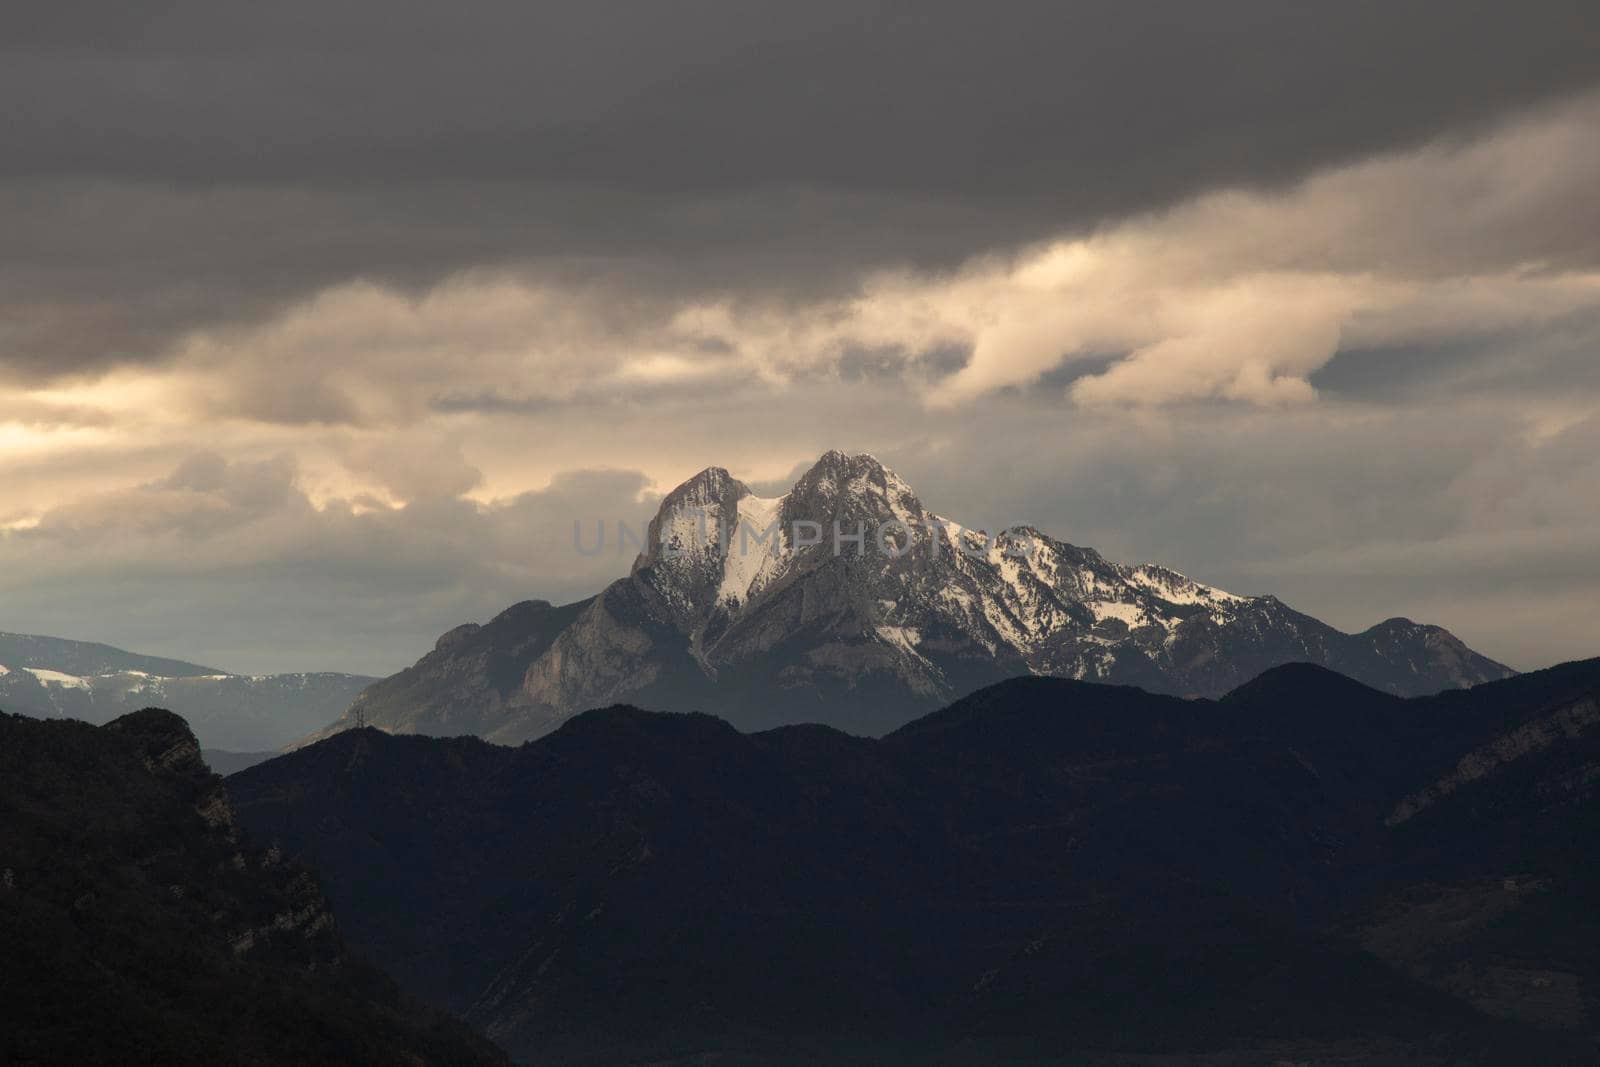 Landscape showing Pedraforca mountain covered by snow and a cloudy sky over it